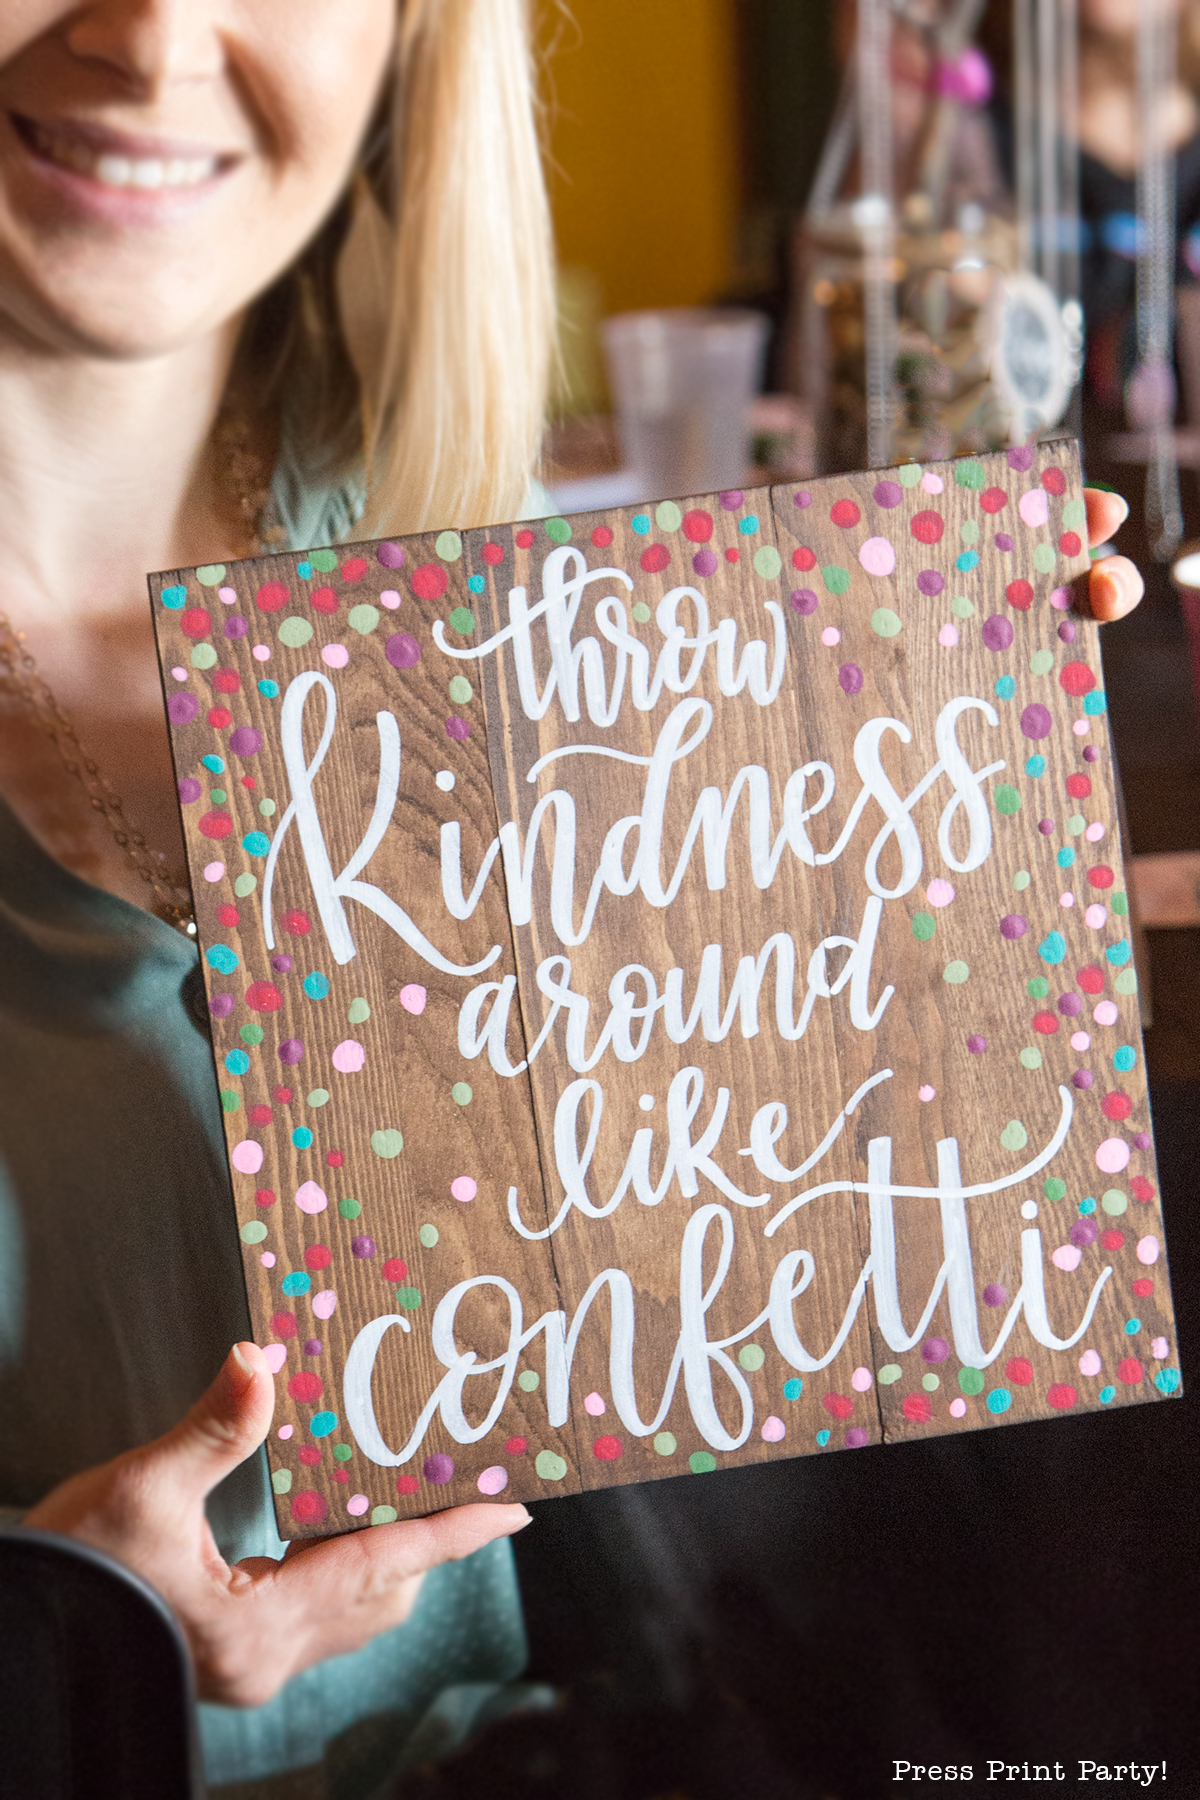 An Inspirational Mother Daughter Date She'll Treasure Forever Beautiful Inside and Out- By Press Print Party! - Throw kindness around like confetti